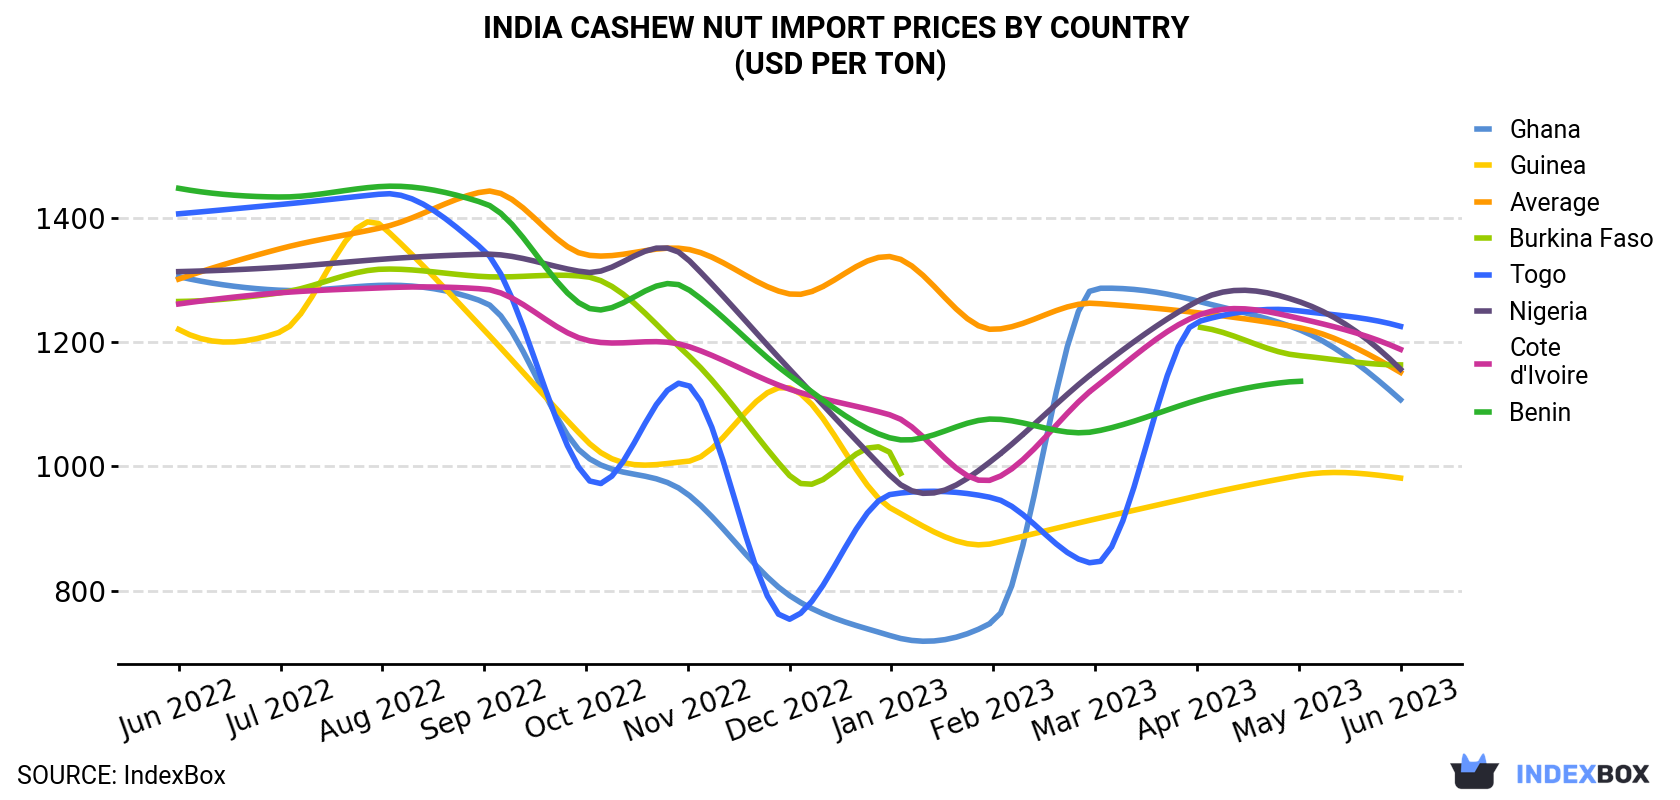 India Cashew Nut Import Prices By Country (USD Per Ton)